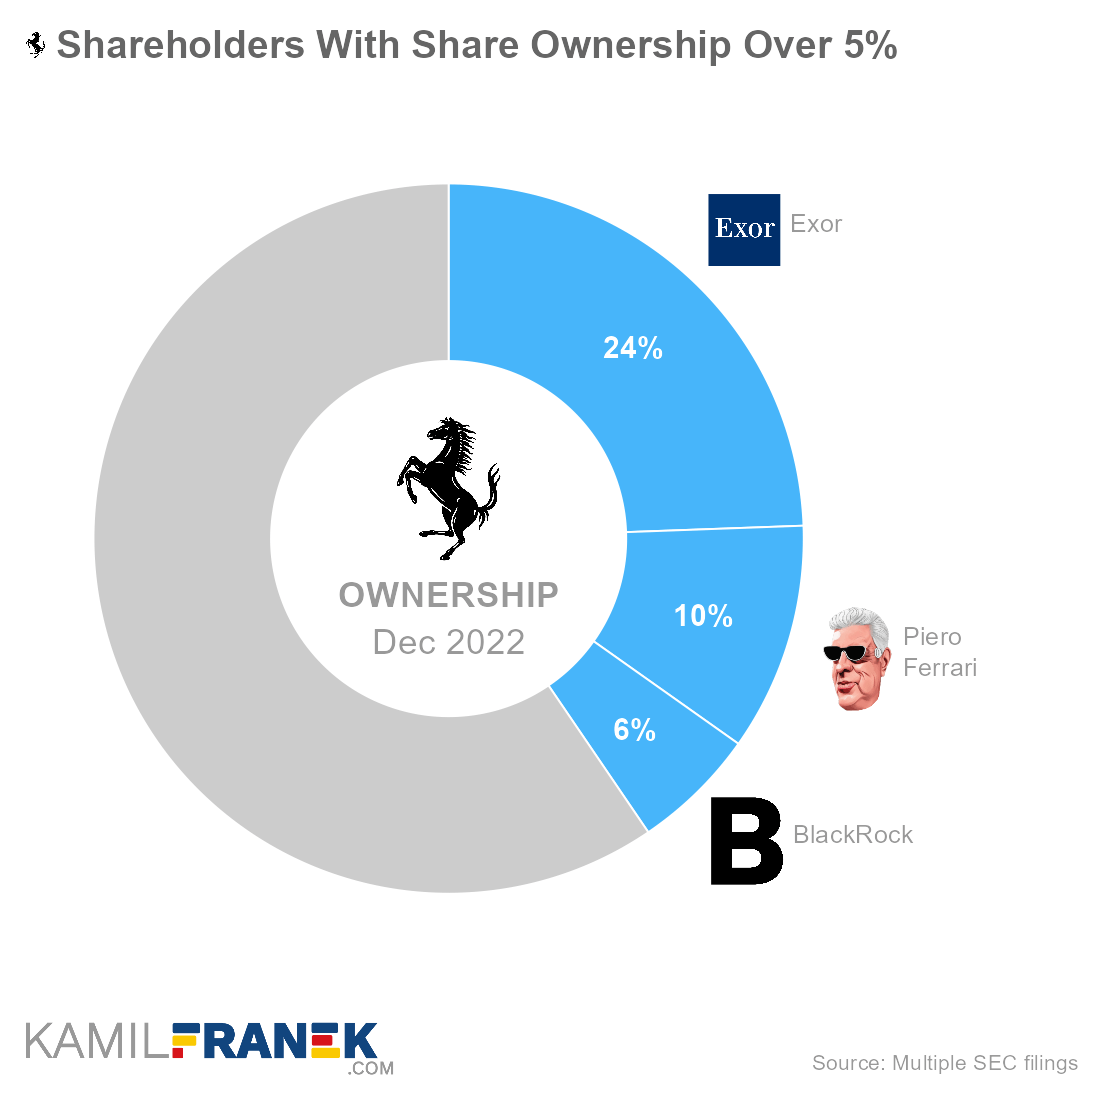 Ferrari largest shareholders by share ownership and vote control (donut chart)